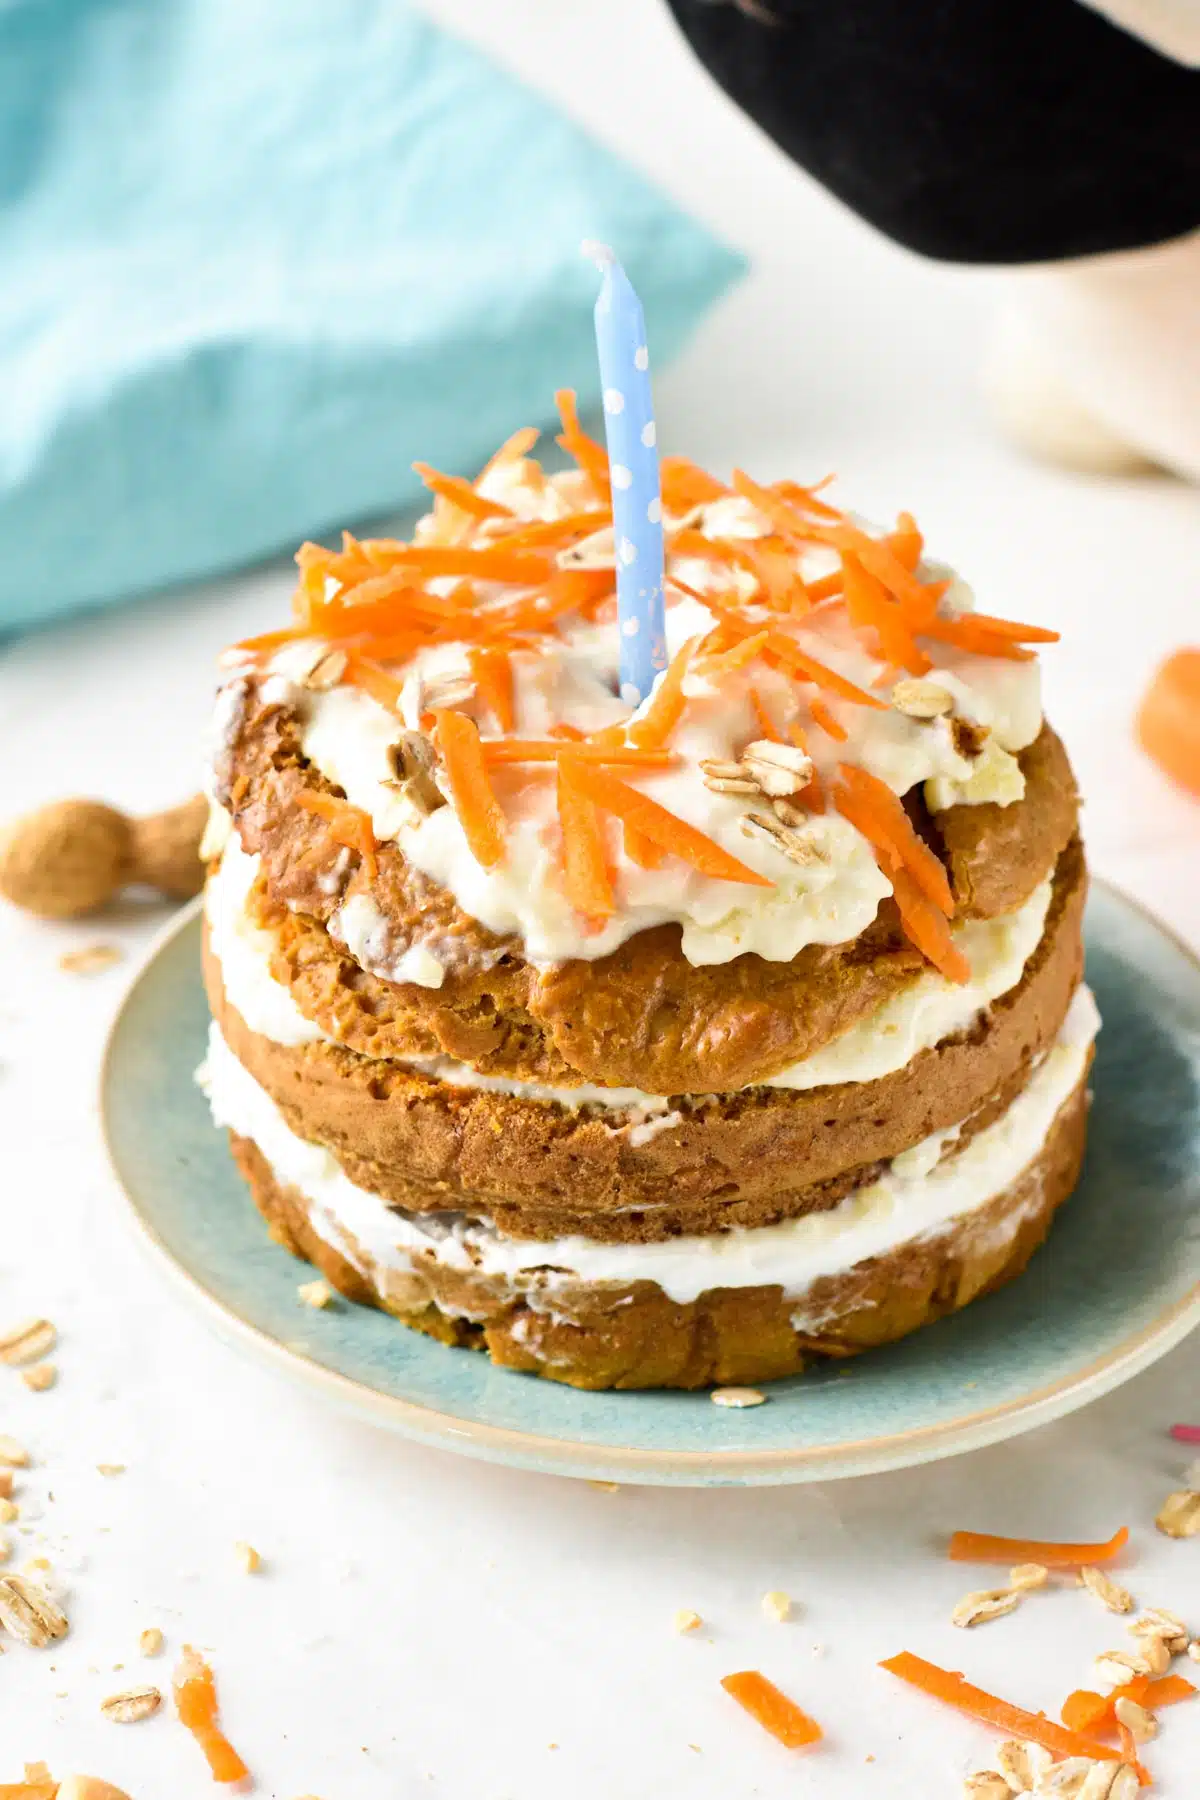 This Carrot Cake for Dogs is an easy, healthy dog cake recipe perfect to celebrate your dog's birthday. It's easy to make in one bowl and packed with nutrients that are good for your dog's skin and body.